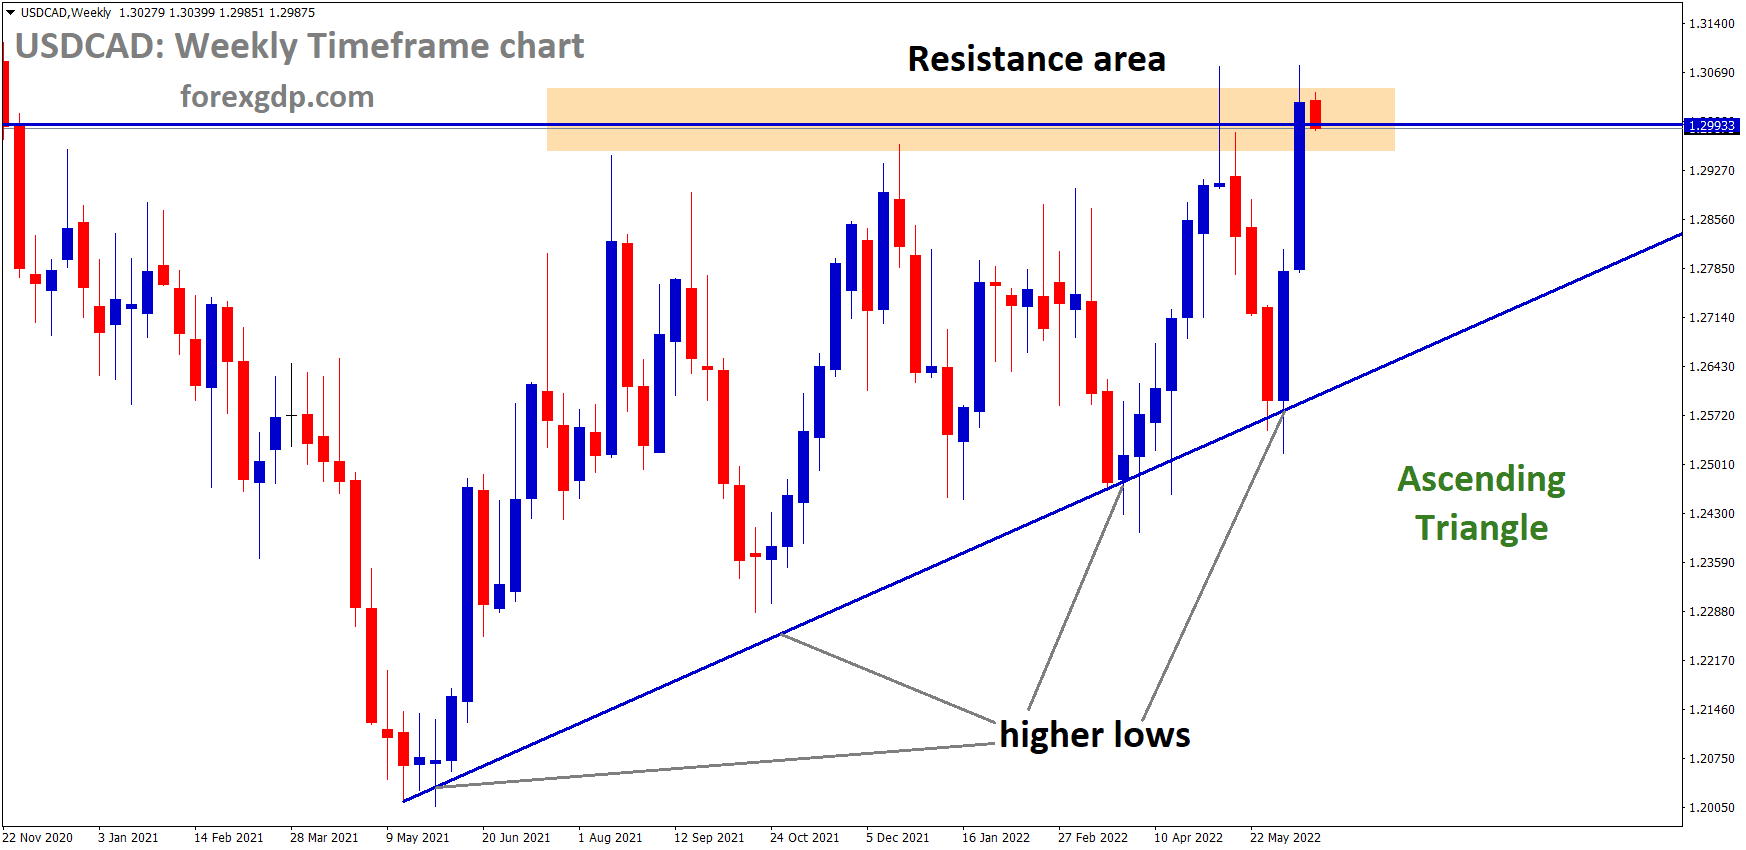 USDCAD is moving in an Ascending triangle pattern and the Market has reached the Horizontal resistance area of the pattern